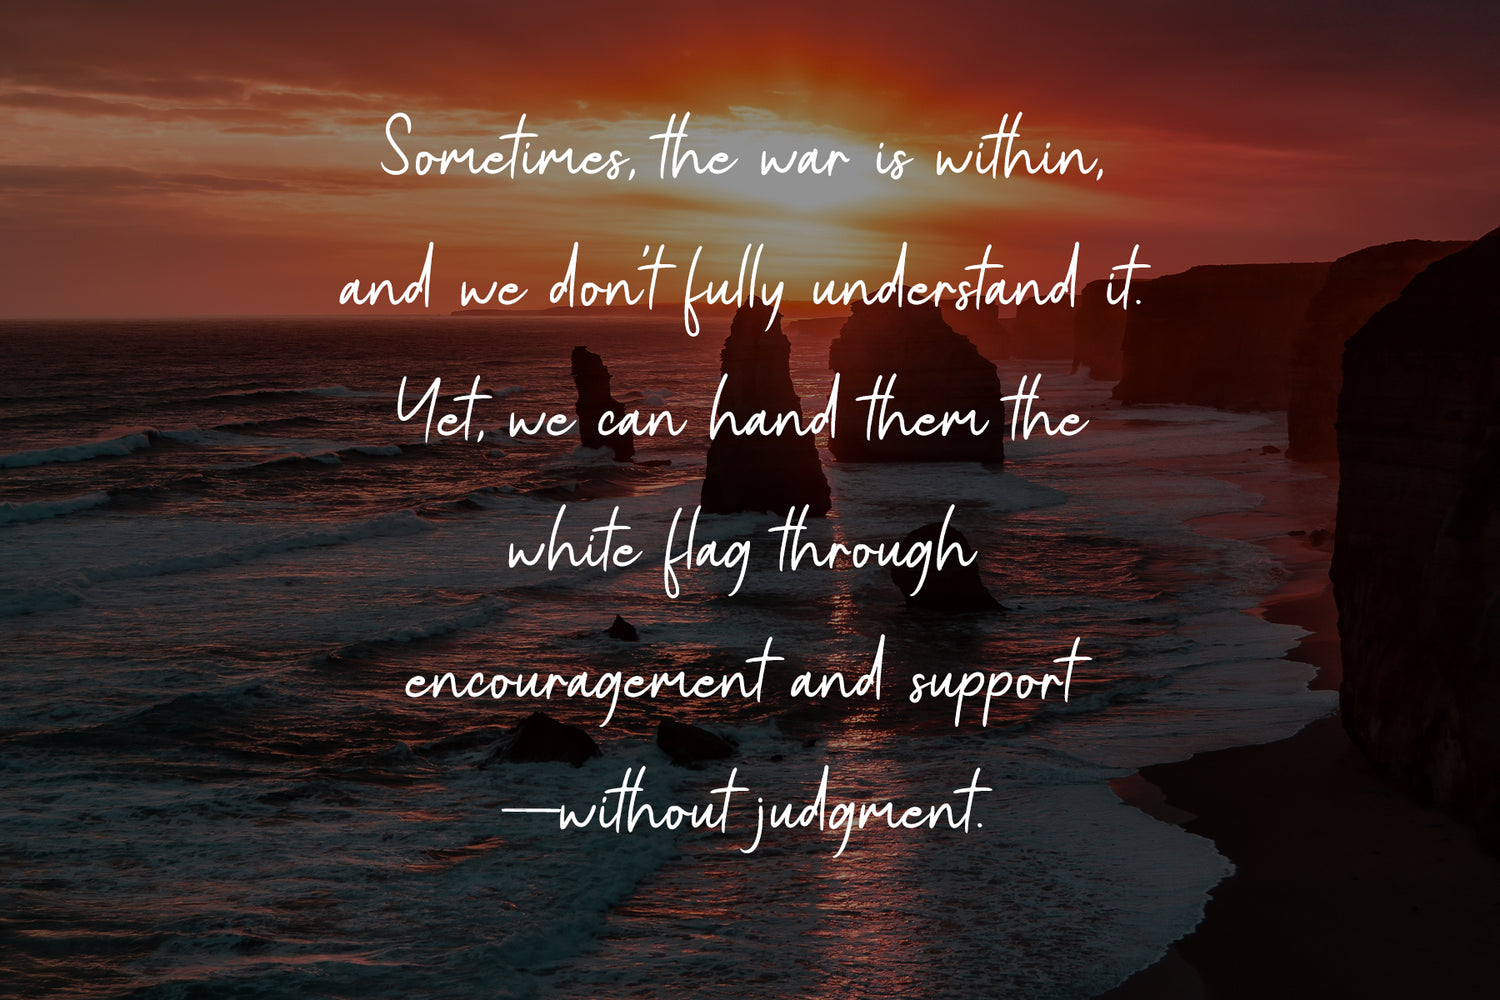 Quote about supporting others with mental health challenges with encouragement and support, without judgment.